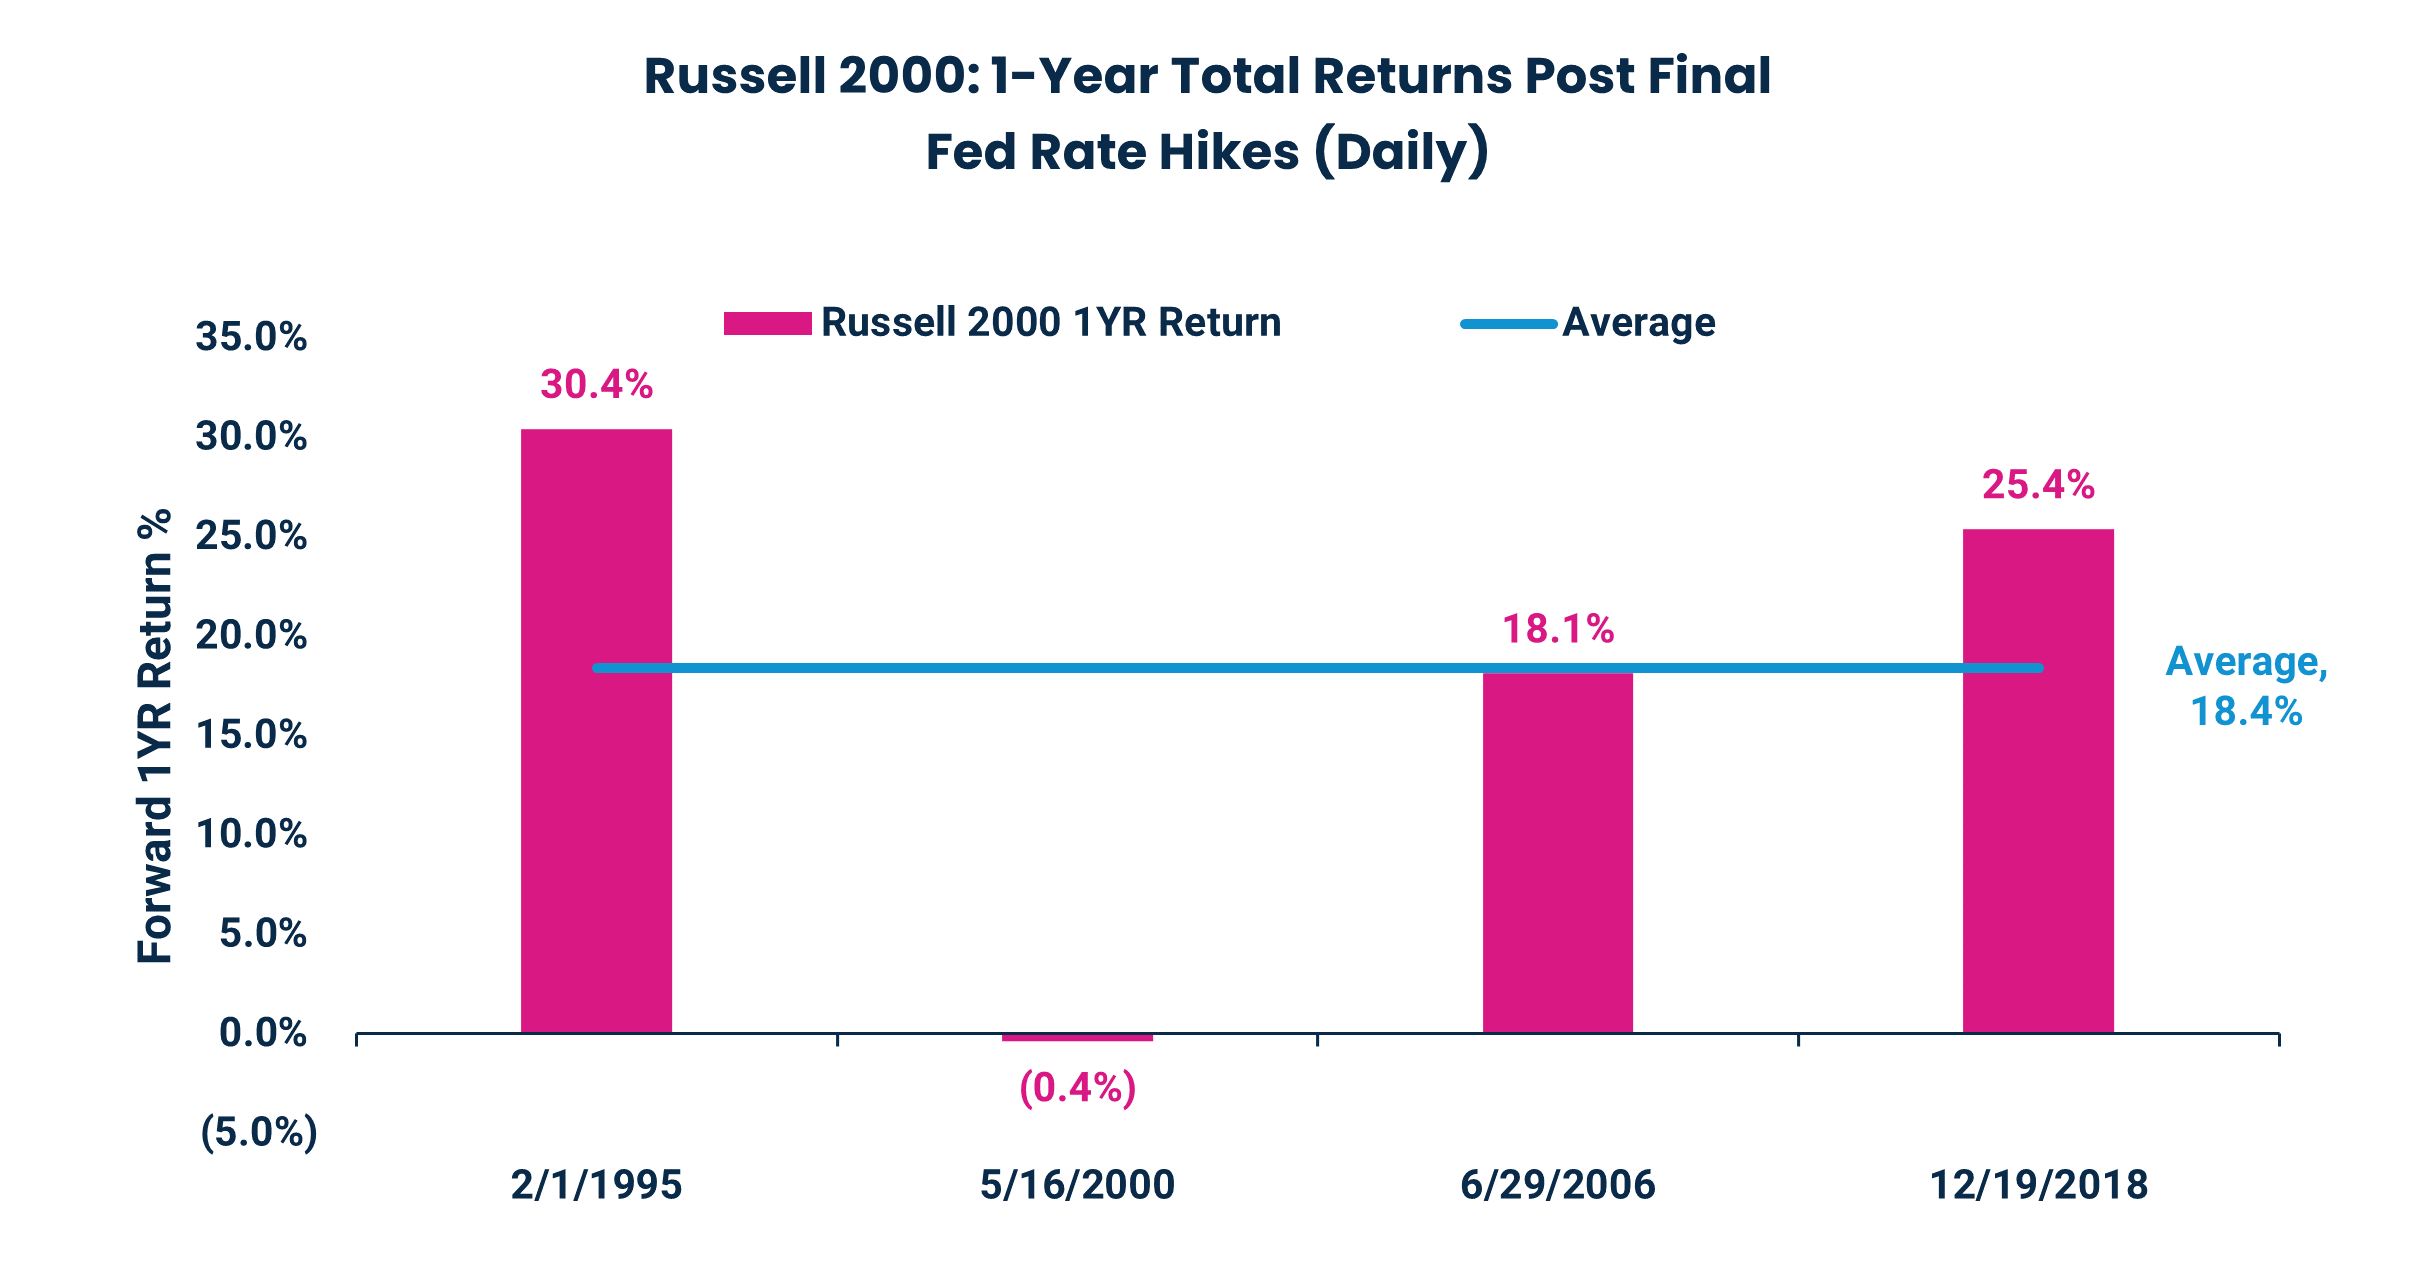 Russell 2000: 1-Year Total Returns Post Final
Fed Rate Hikes (Daily)